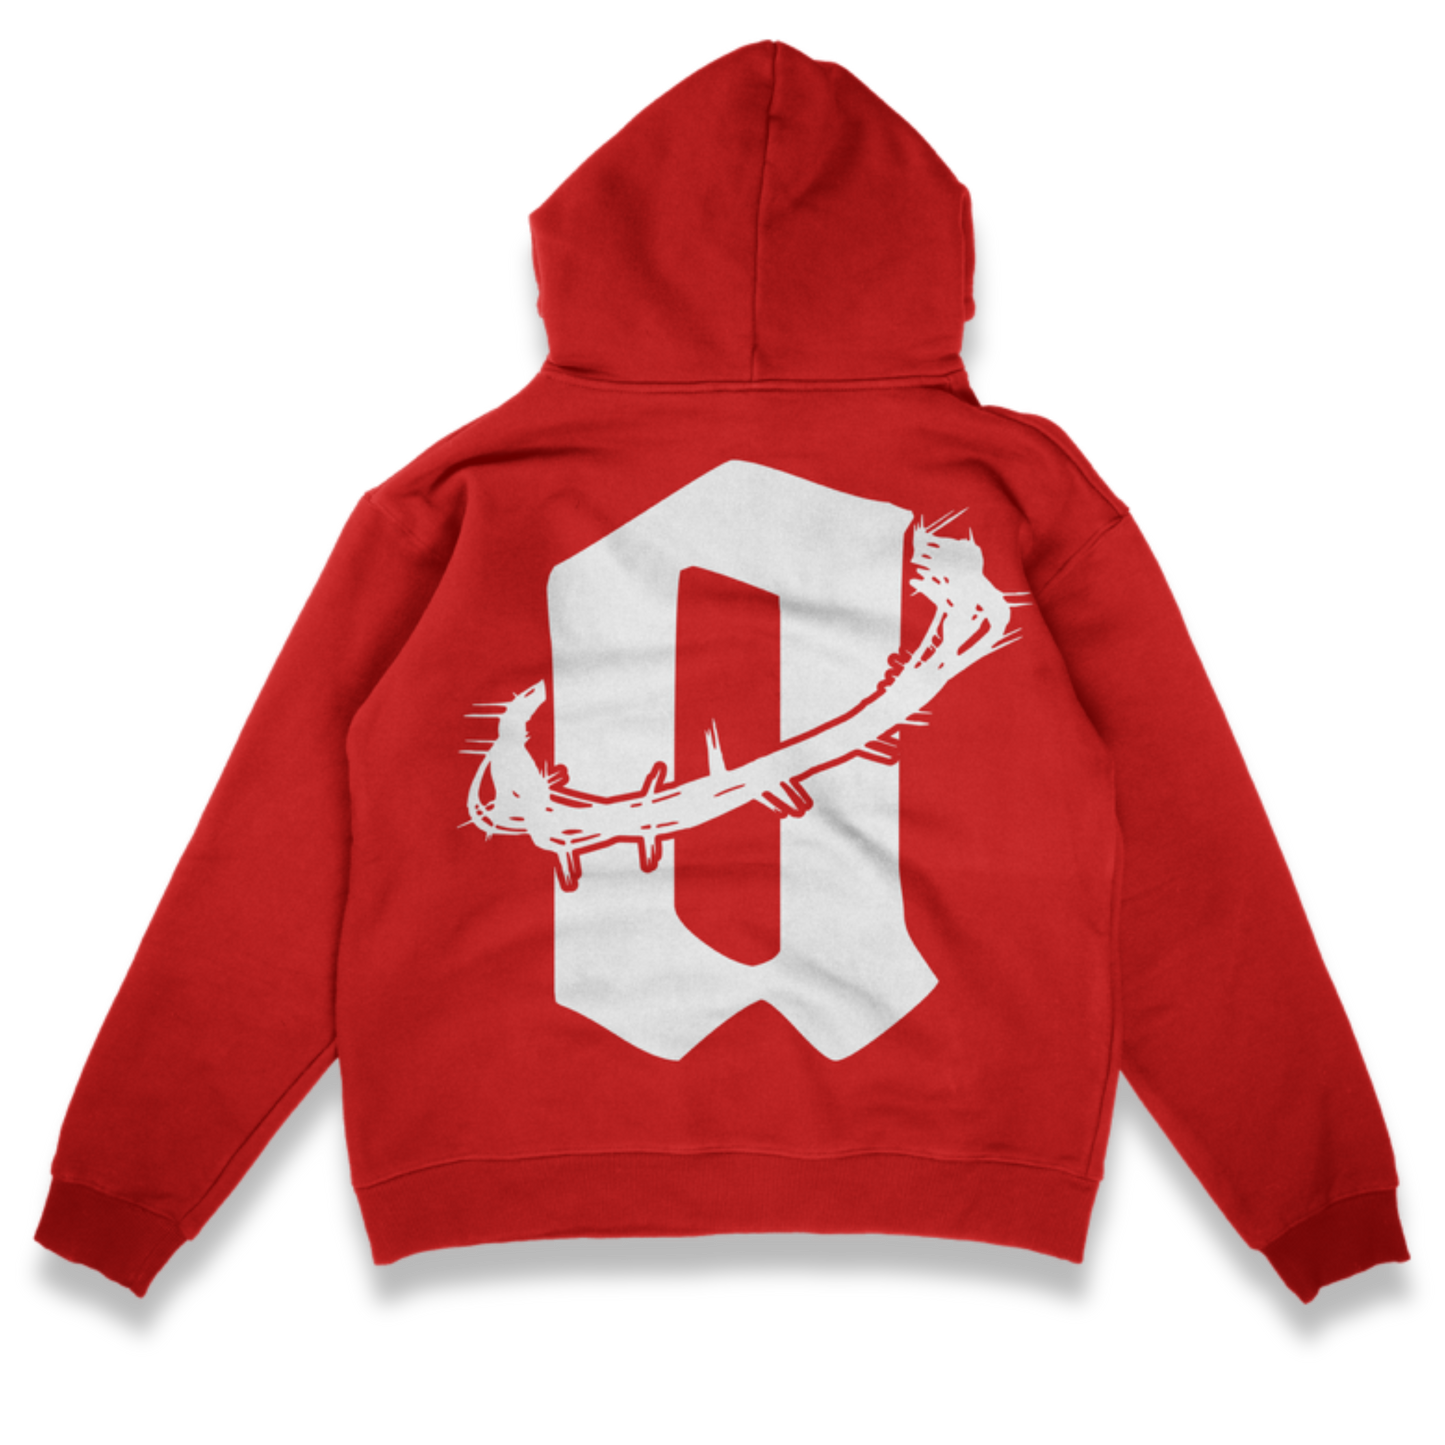 Atoned Hoodie-(Red)